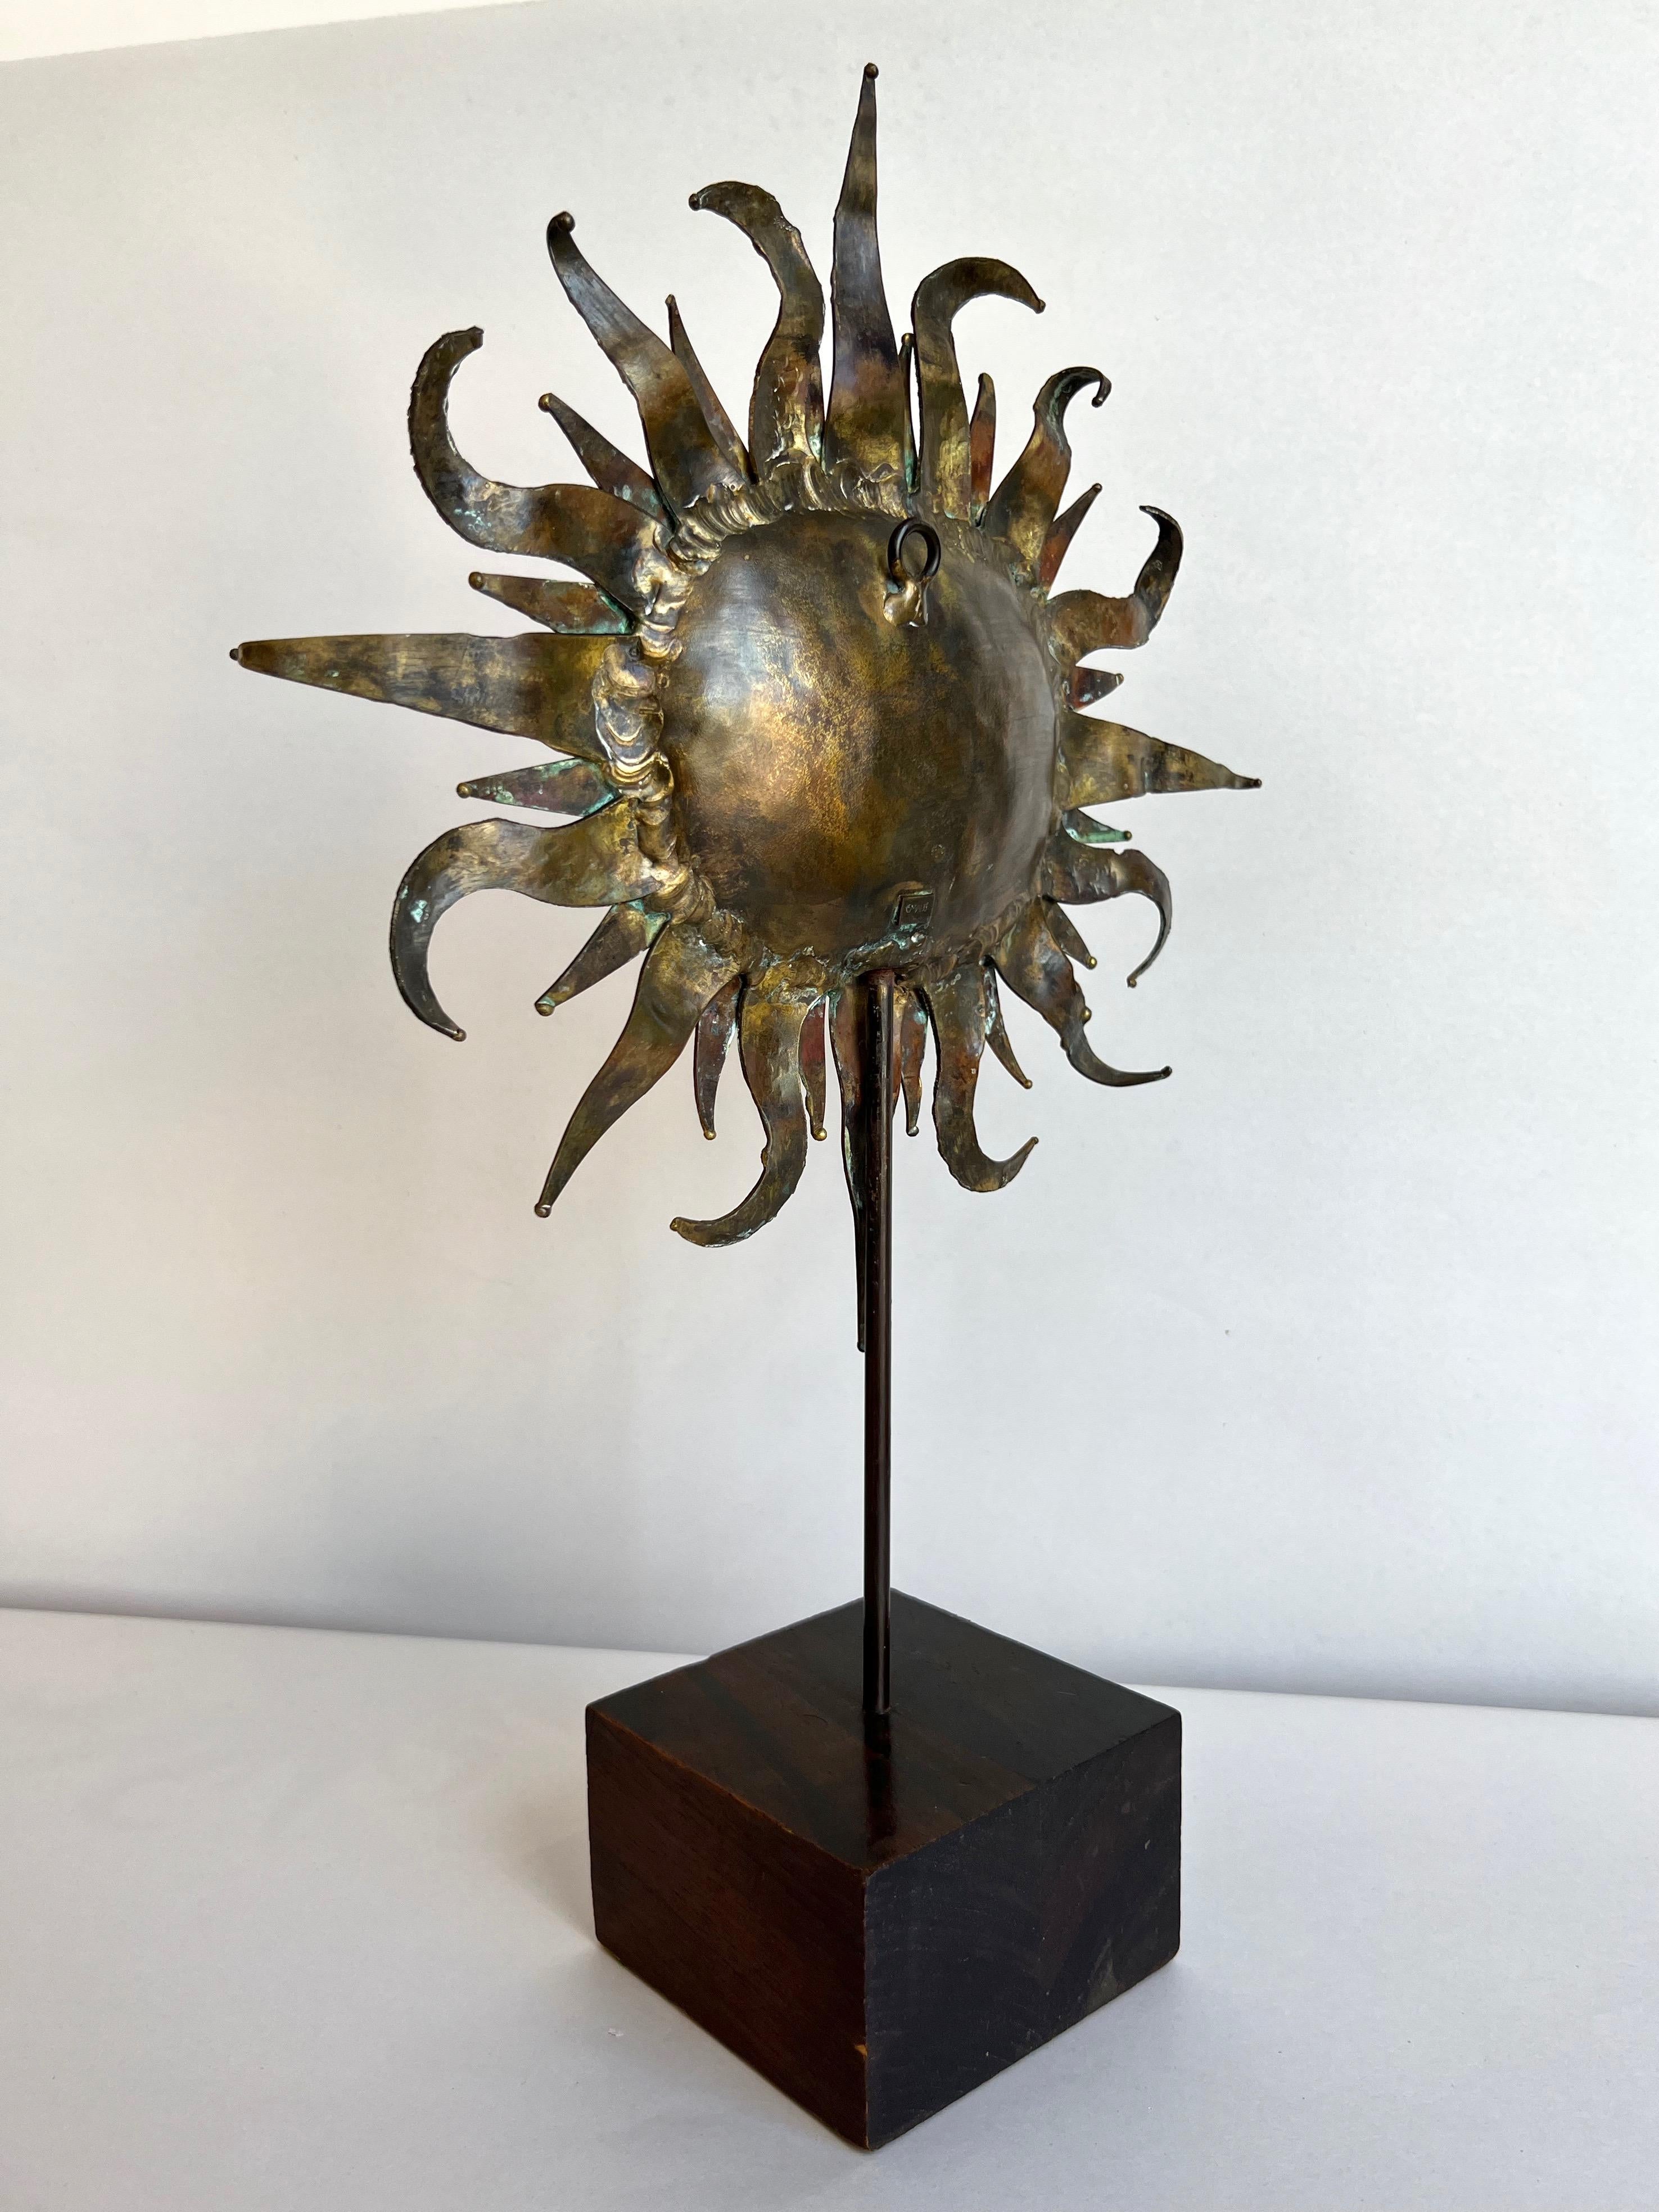 Emaús Brutalist Brass and Bronze Sun Face Sculpture on Stand, Signed, 1960s For Sale 2